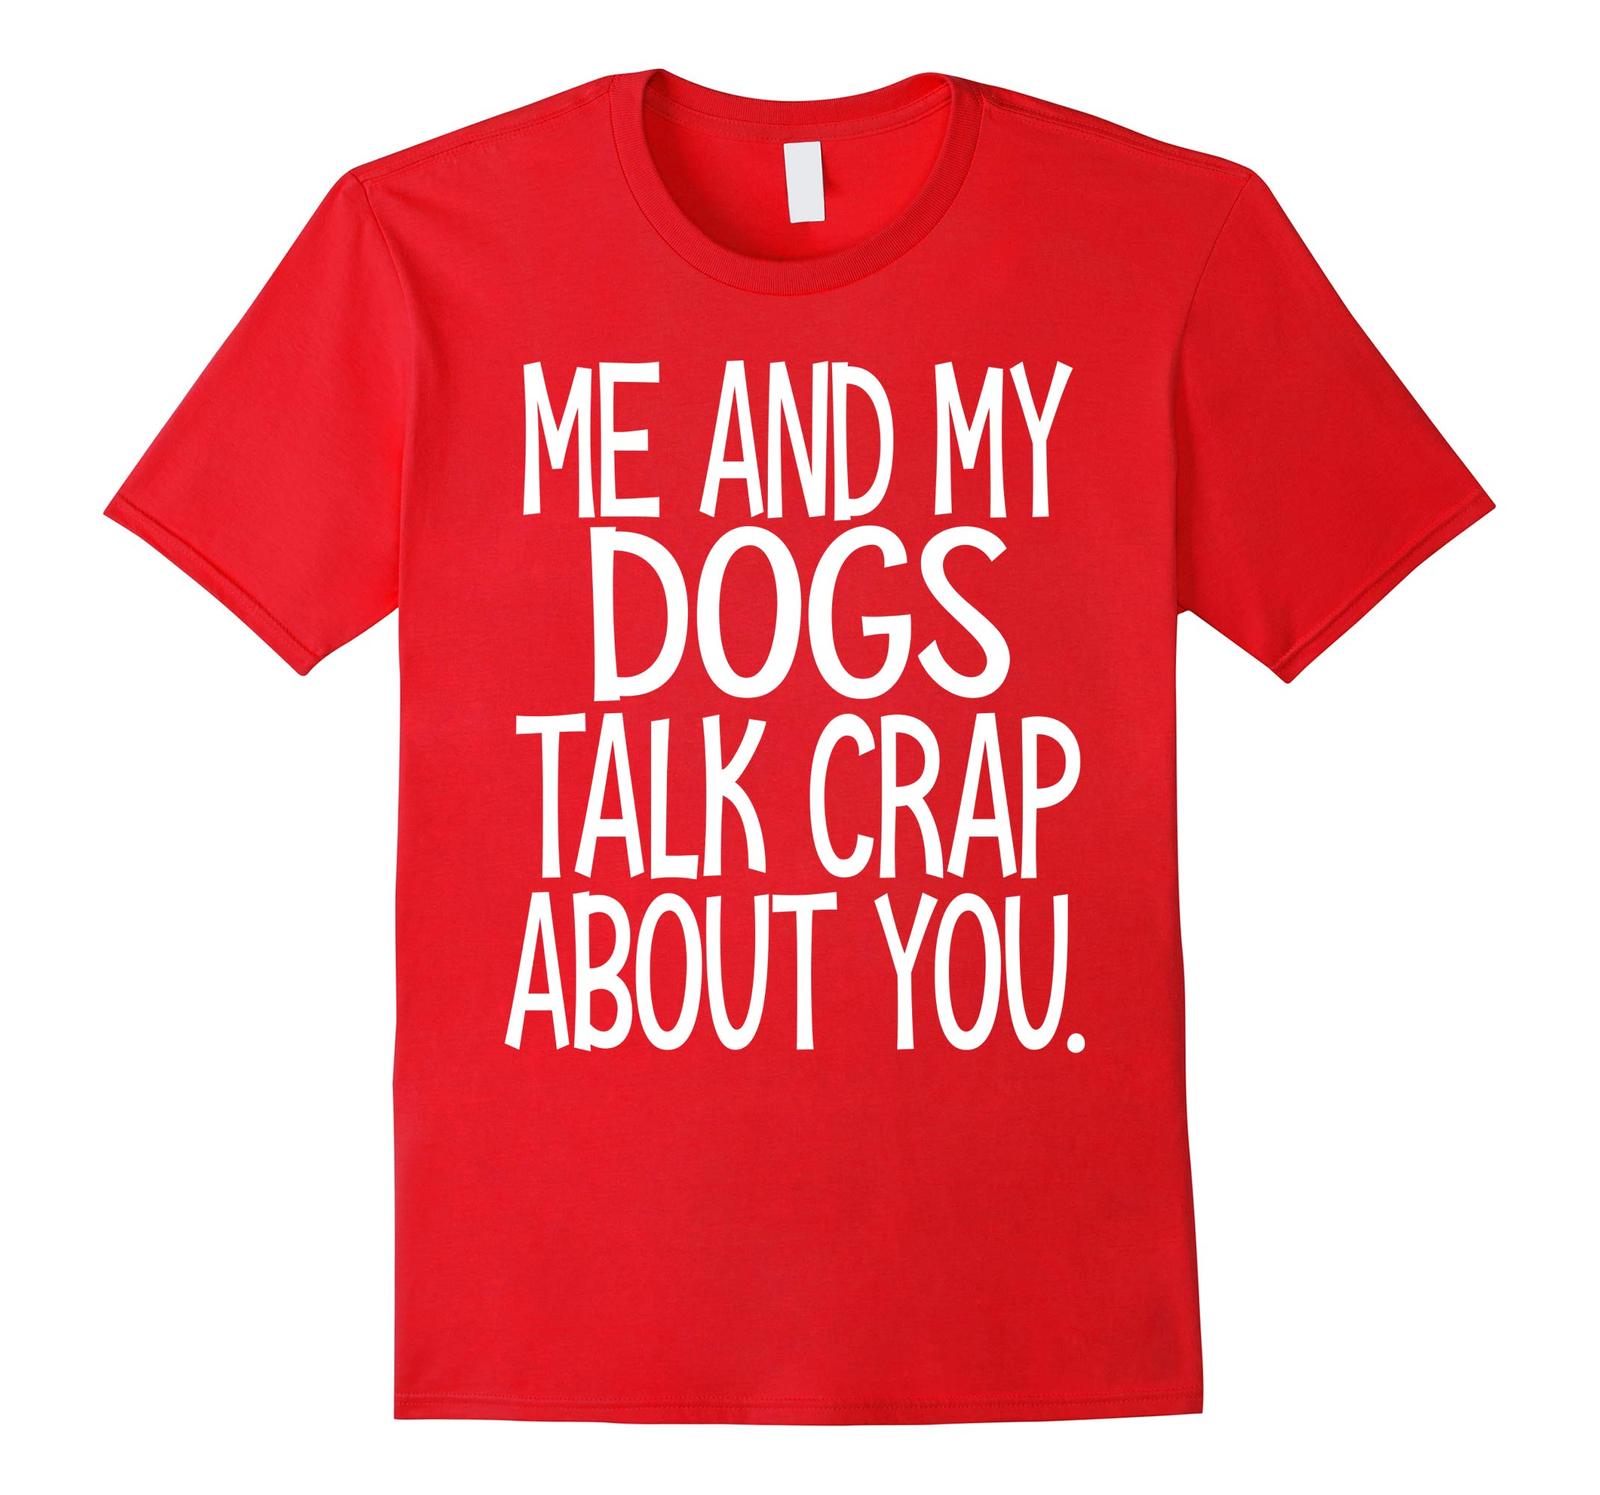 Dog Fashion - Me and my dogs talk crap about you shirt funny dog tshirt Men